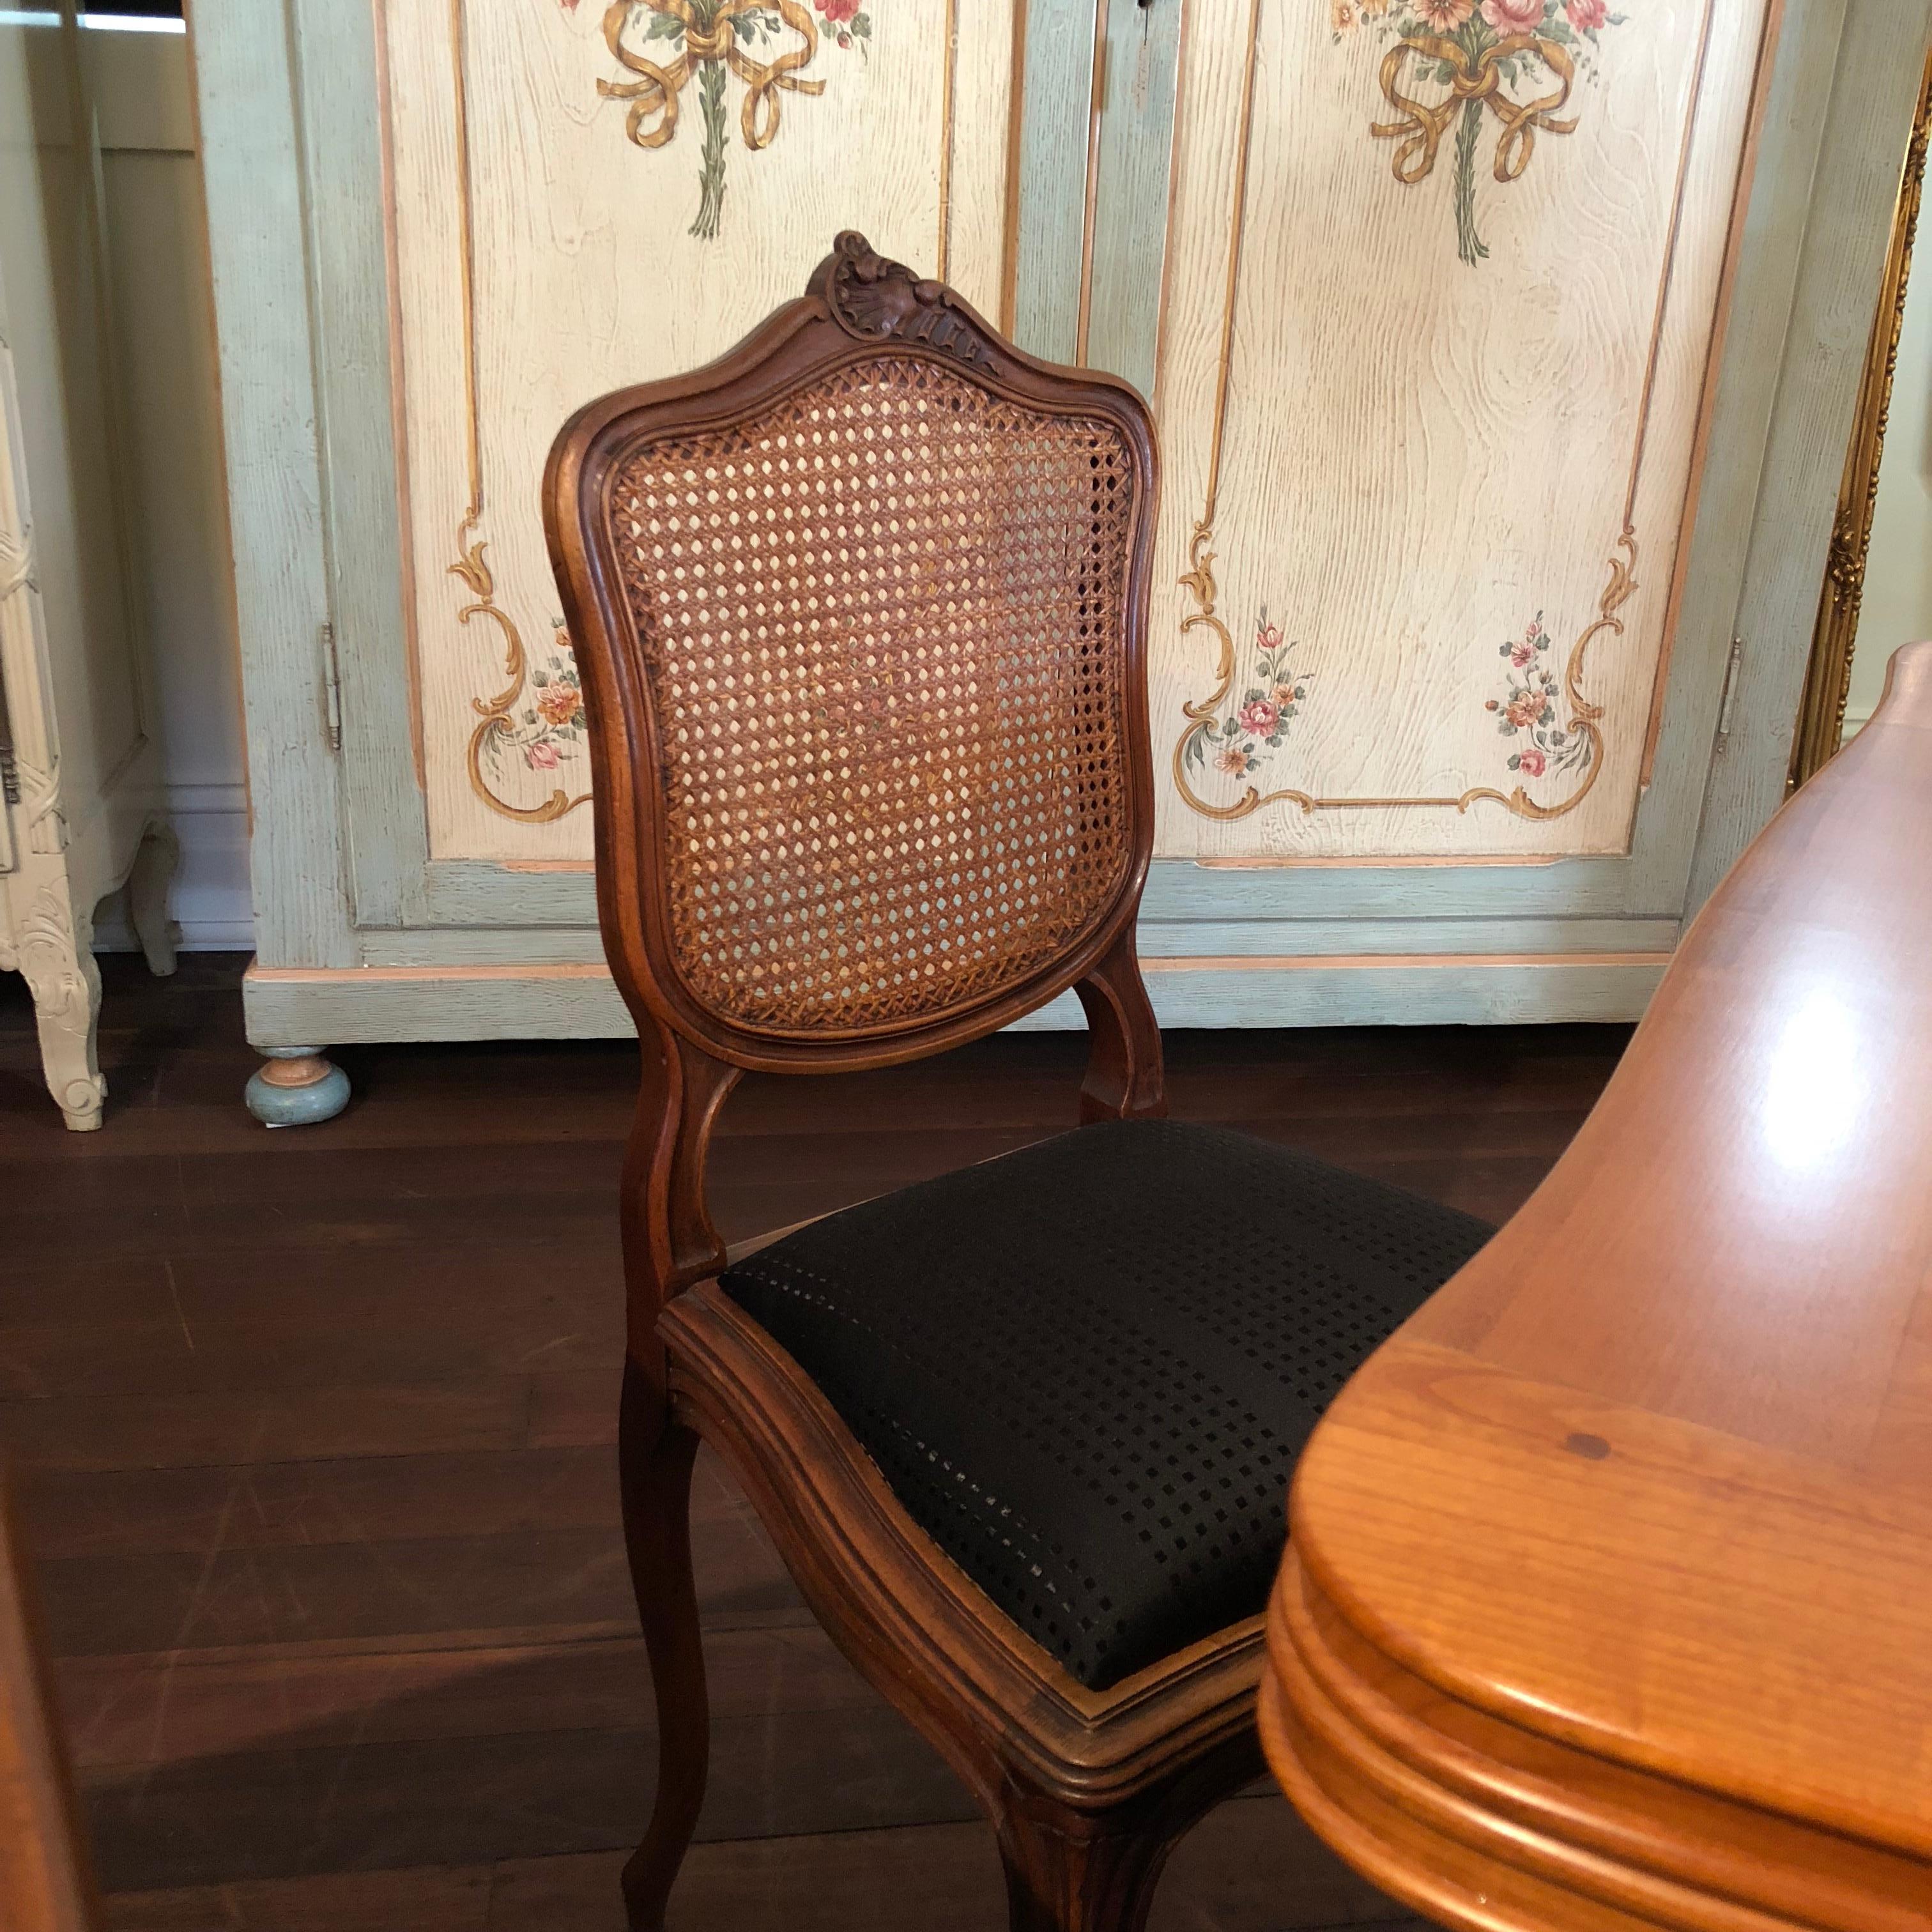 These magnificent Louis XV French Lattice dining chairs feature stylish noir modern upholstery and original lattice backs. They are dated at approximately circa 1880-1890 and have been crafted in the ever sophisticated Louis XV style, complete with